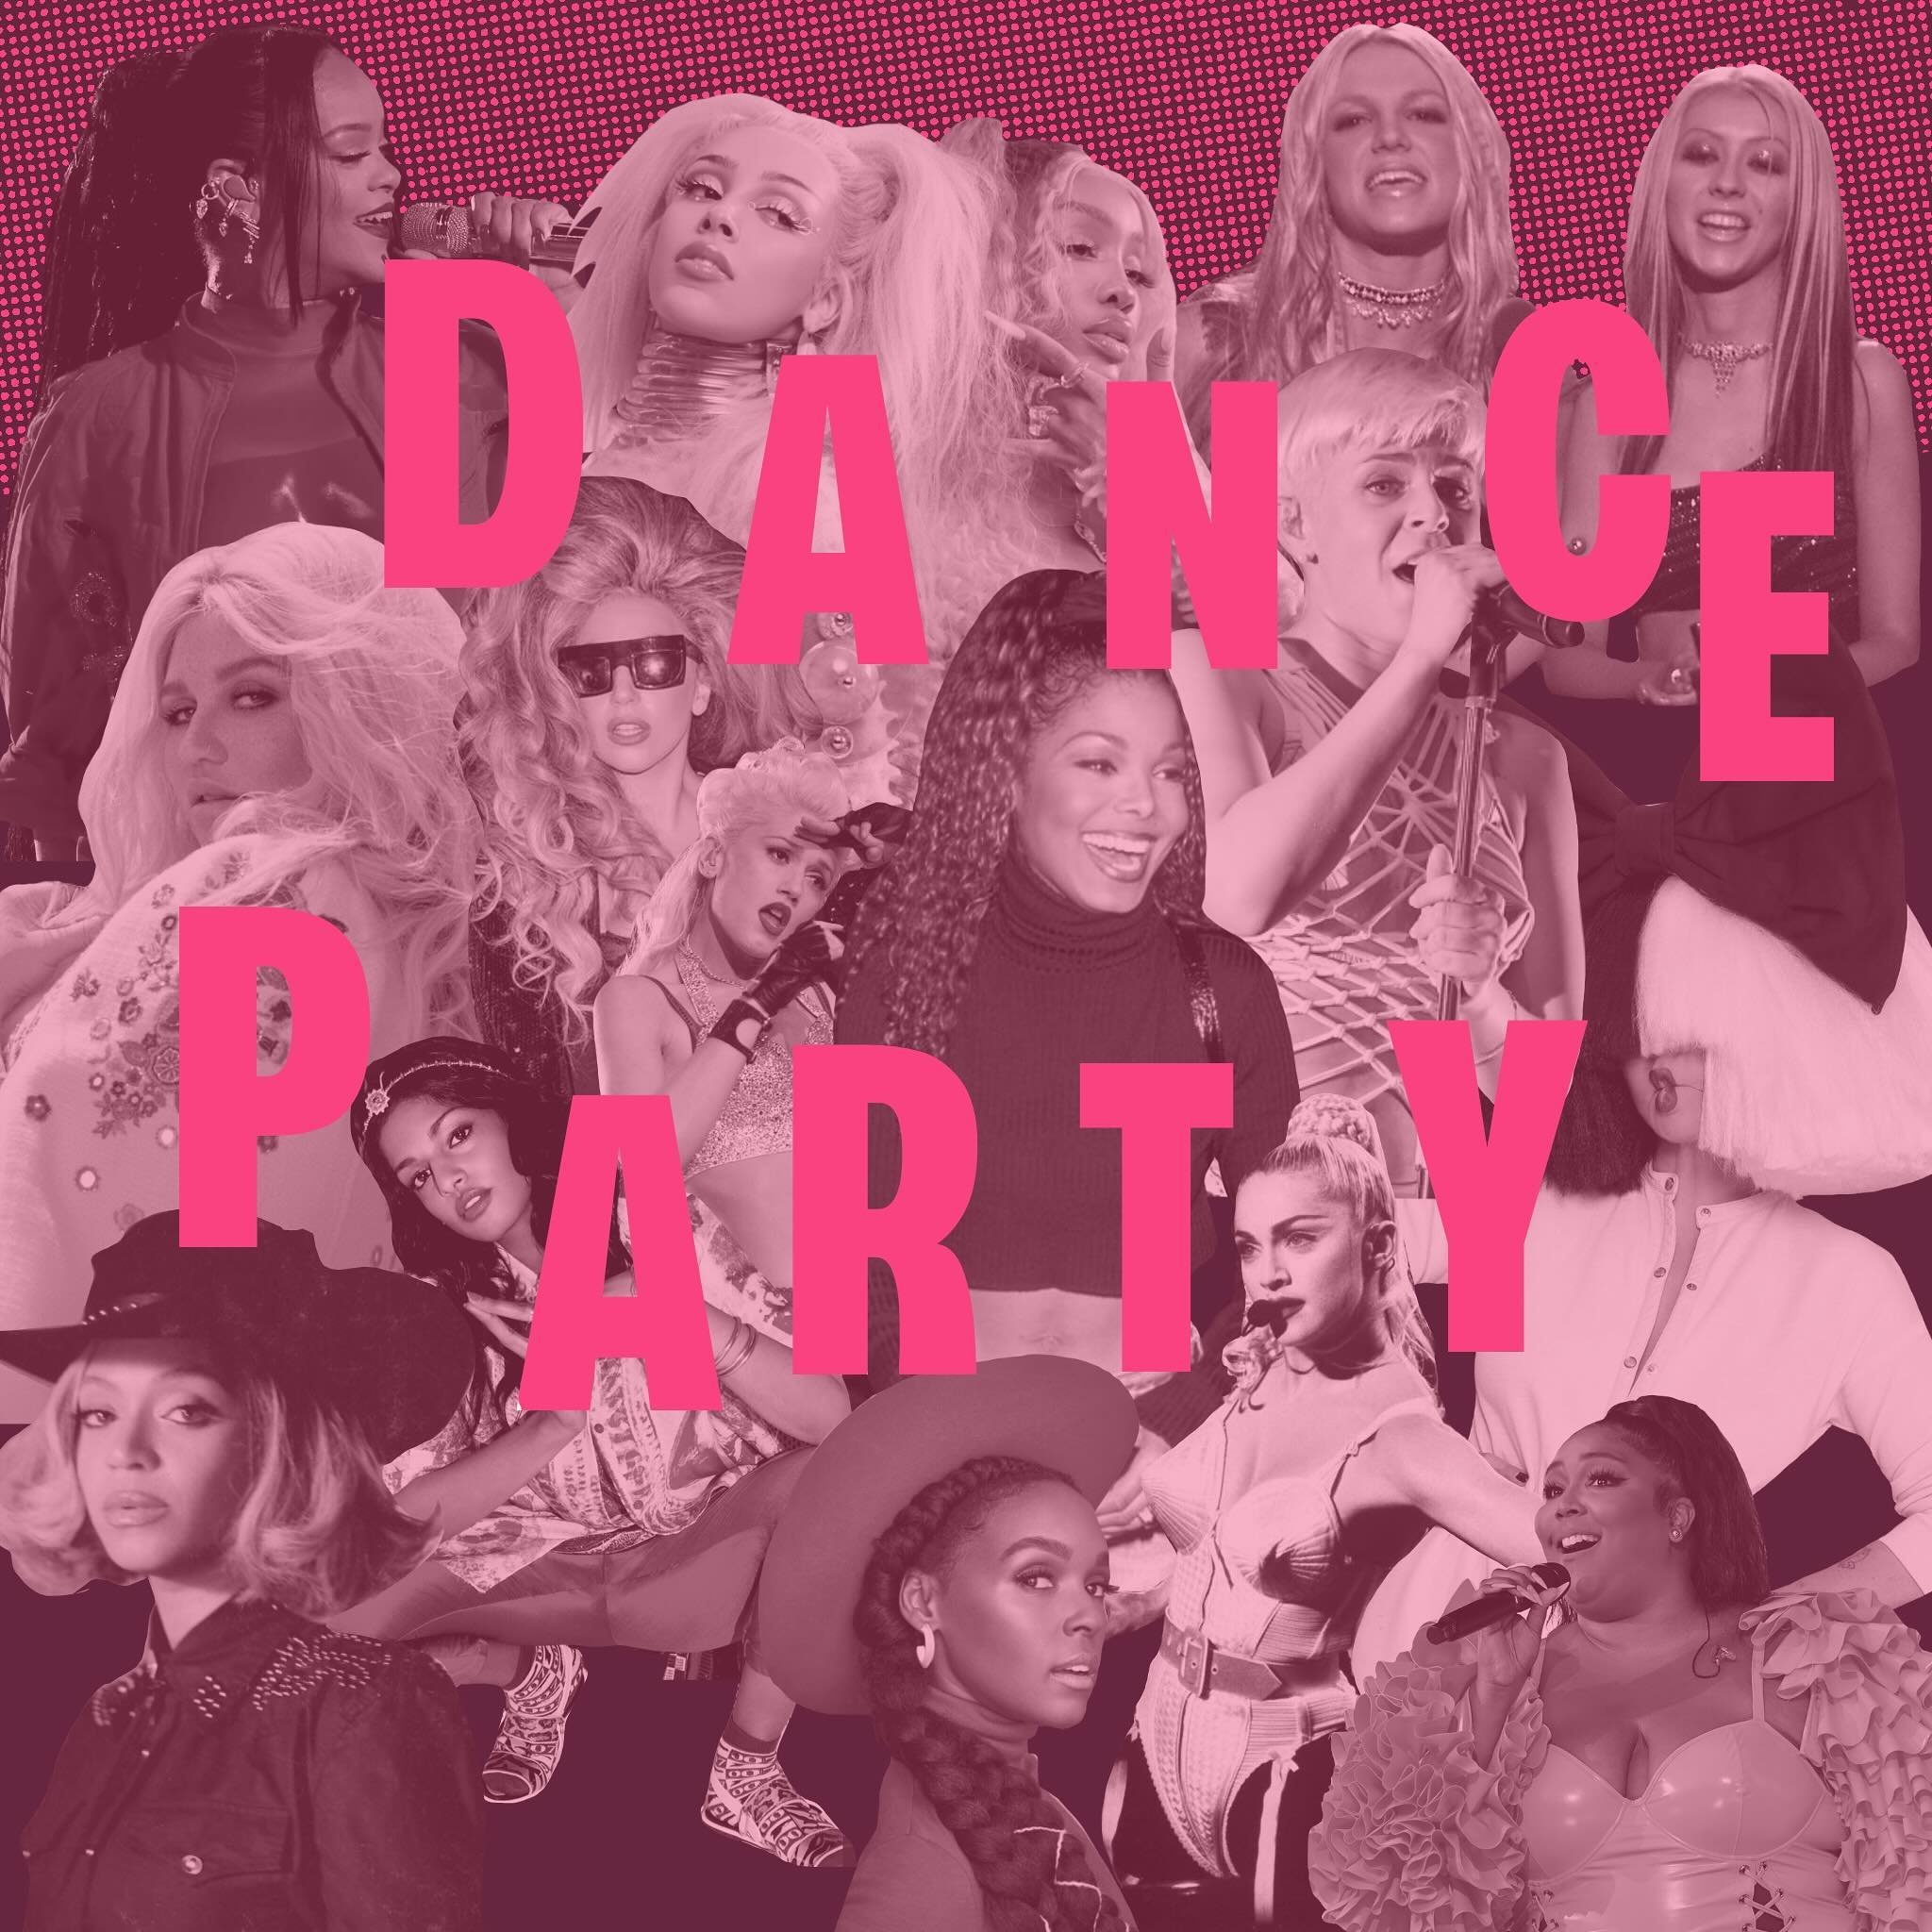 Femmes &amp; friends! Reminder about our Femmes to the Front dance party this Saturday 5/11 at 7:30pm 🪩 

$5 cover @ the door 💃 Meet up with your friends and shake your booty in a safe &amp; inclusive environment. 17+, BYOB for 21+, &amp; LOTS of g